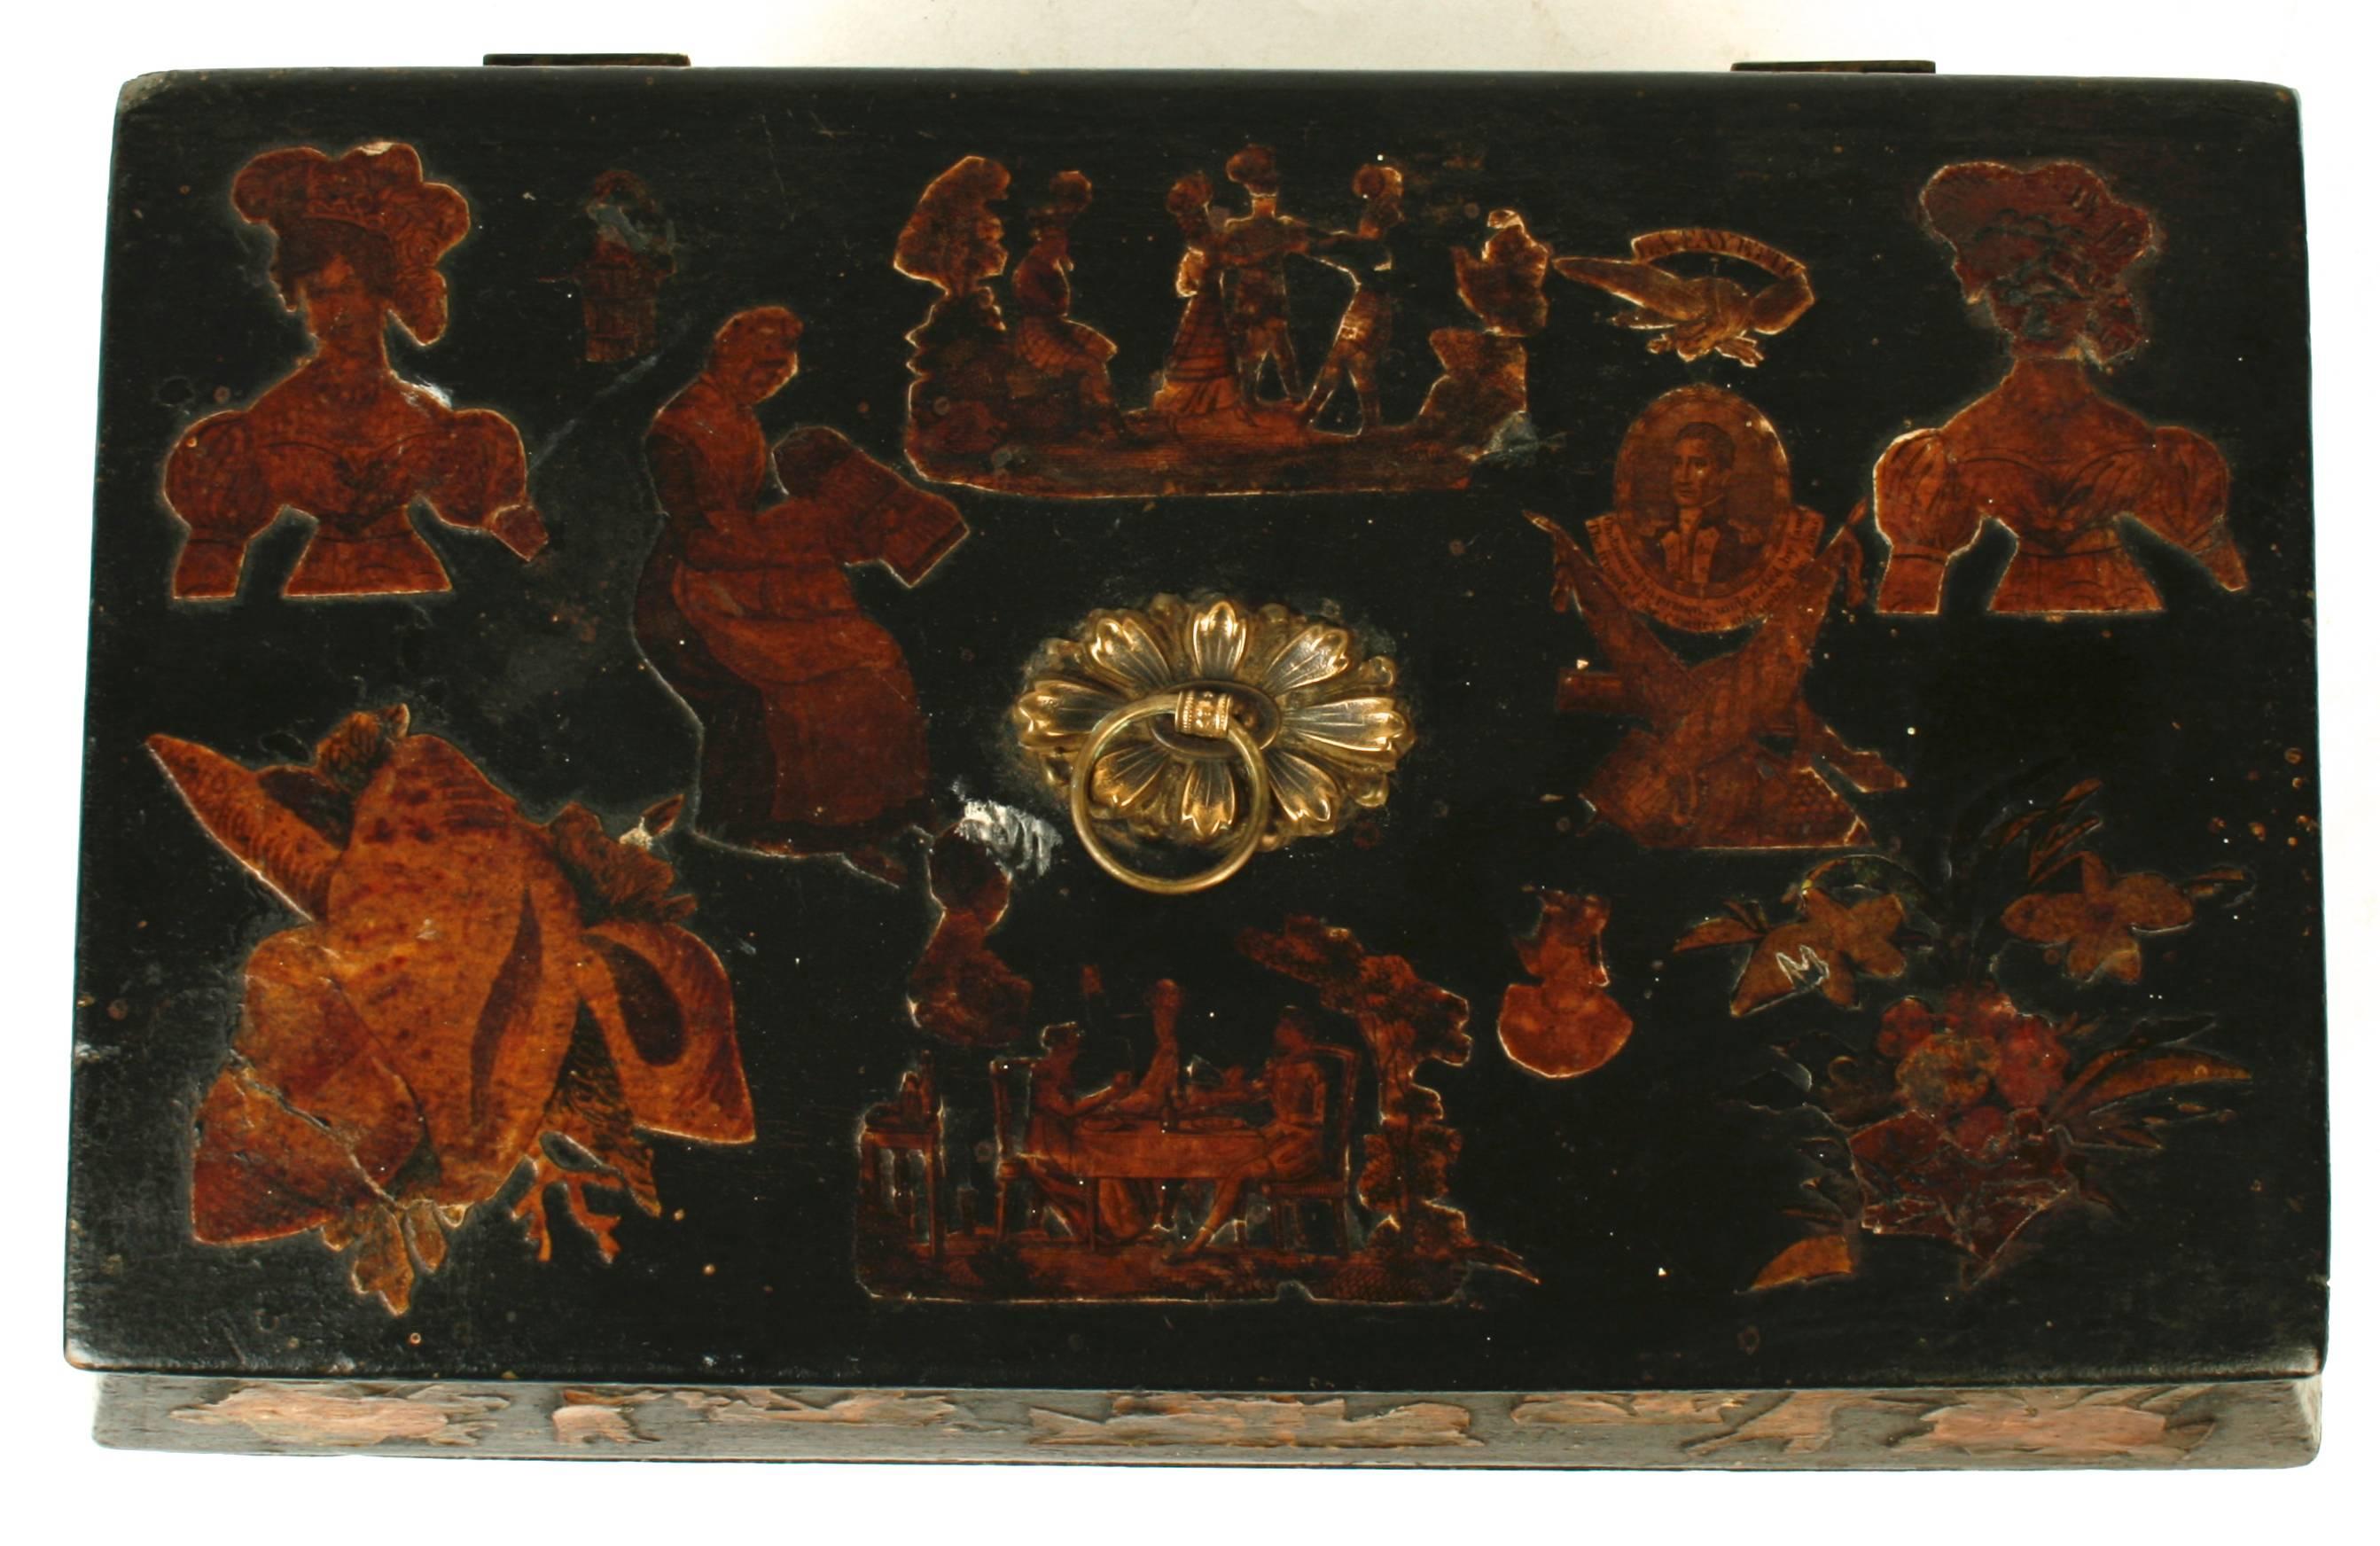 English Regency decoupage box, early 19th century. This box was made by using the decorative finish of decoupage. The box is covered in cut-out images of ladies in feathered hats, a couple at a table, children, shells, birds, flowers and a picture